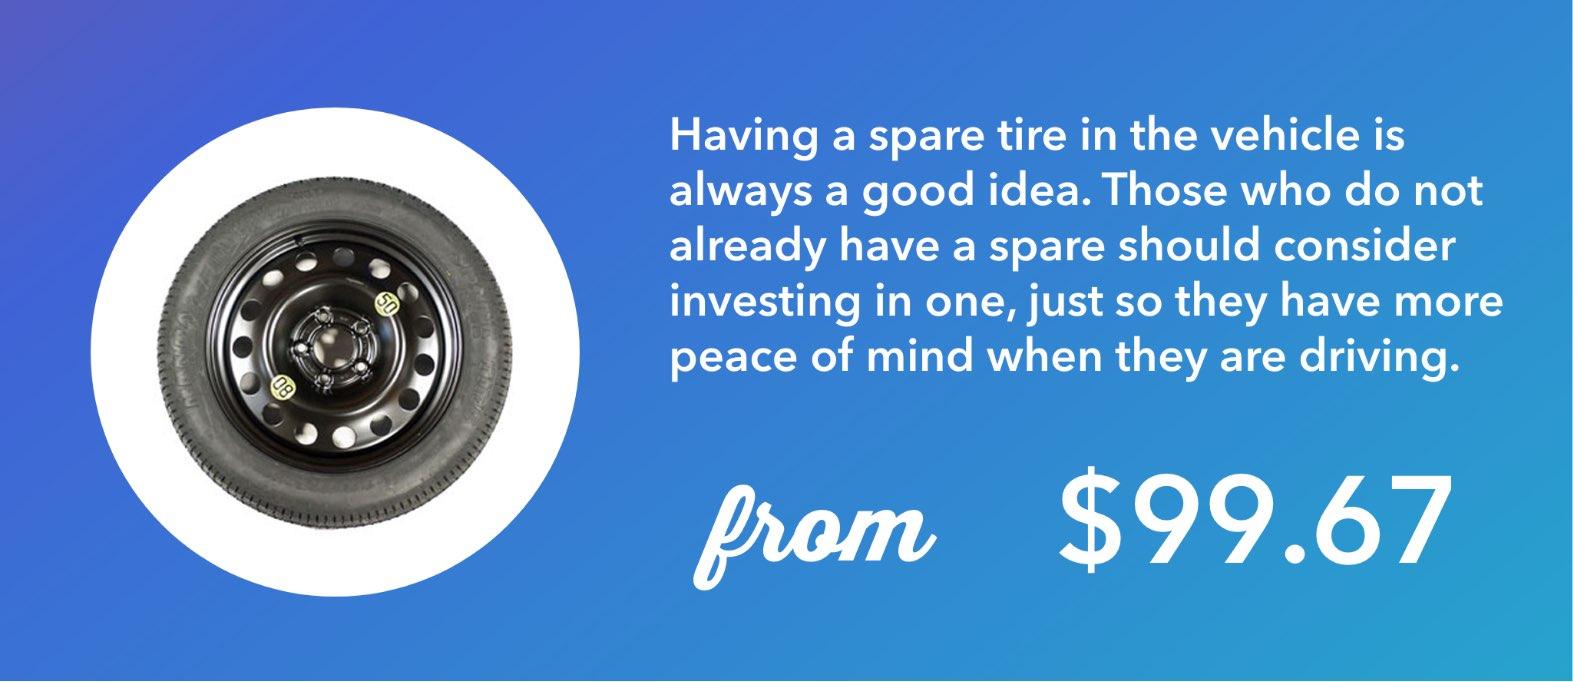 Having a spare tire in the vehicle is always a good idea. Those who do not already have a spare should consider investing in one, just so they have more peace of mind when they are driving.